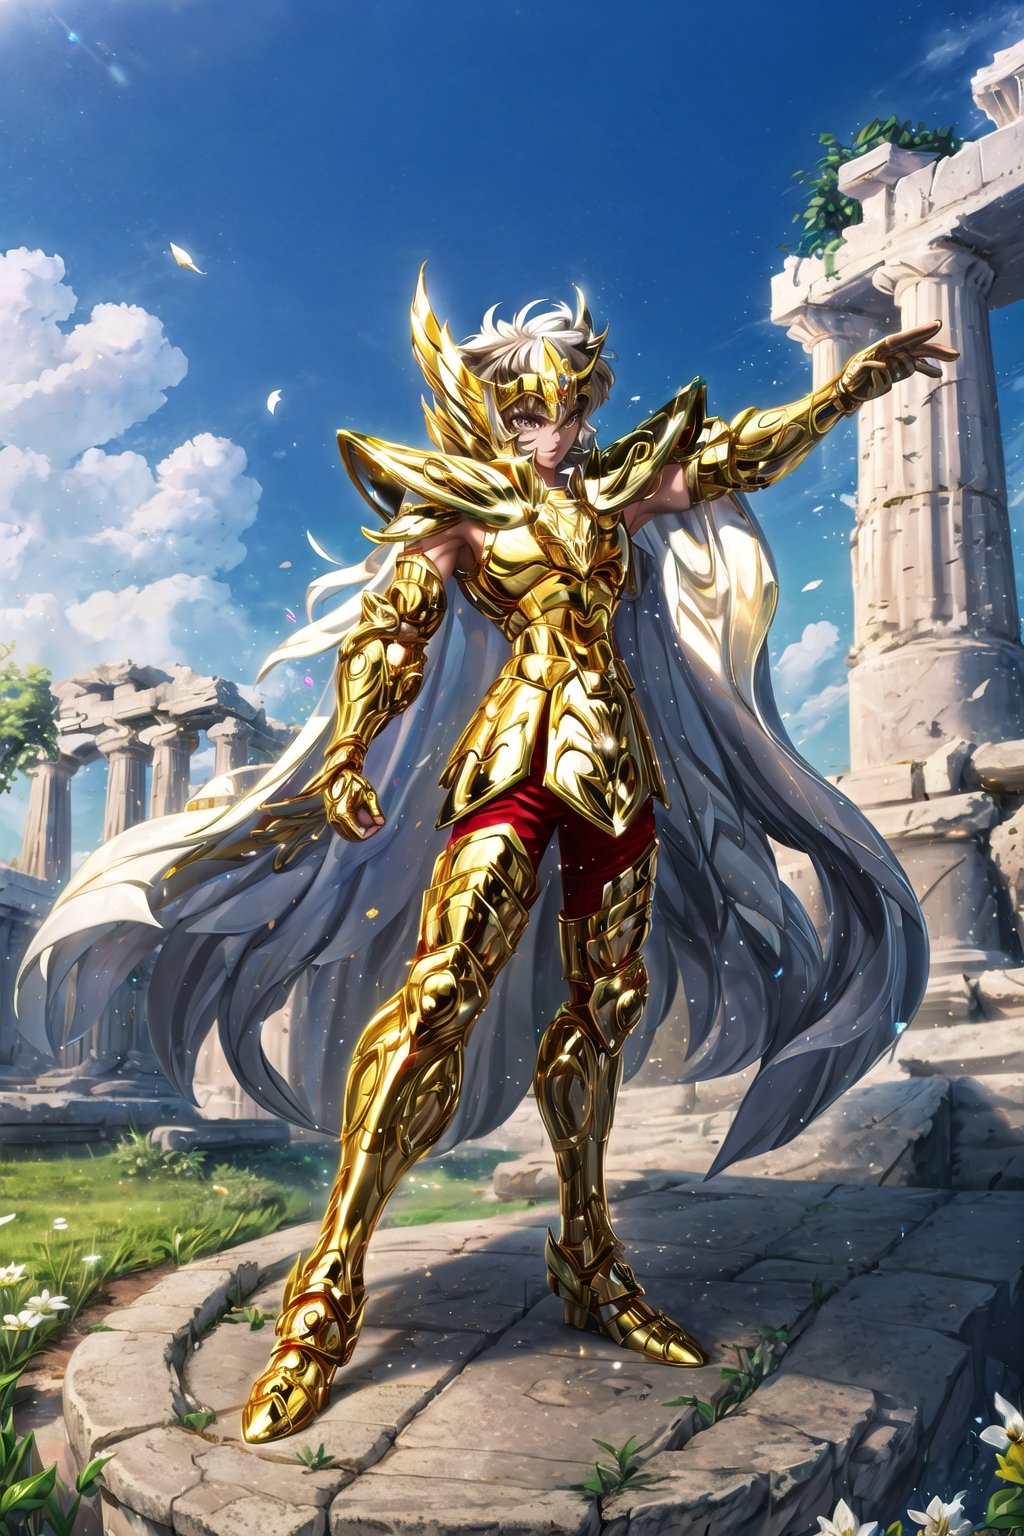 absurdres, highres, ultra detailed,Insane detail in face,  (boy:1.3), Gold Saint, Saint Seiya Style, Gold Armor, Full body armor, no helmet, Zodiac Knights, white long cape, long white hair, Asian Fighting style pose,Pokemon Gotcha Style, gold gloves, long hair, long white cape, messy_hair,  Gold eyes, black pants under armor, full body armor, beautiful old greek temple in the background, beautiful fields, full leg armor, ultrainstinct,FUJI